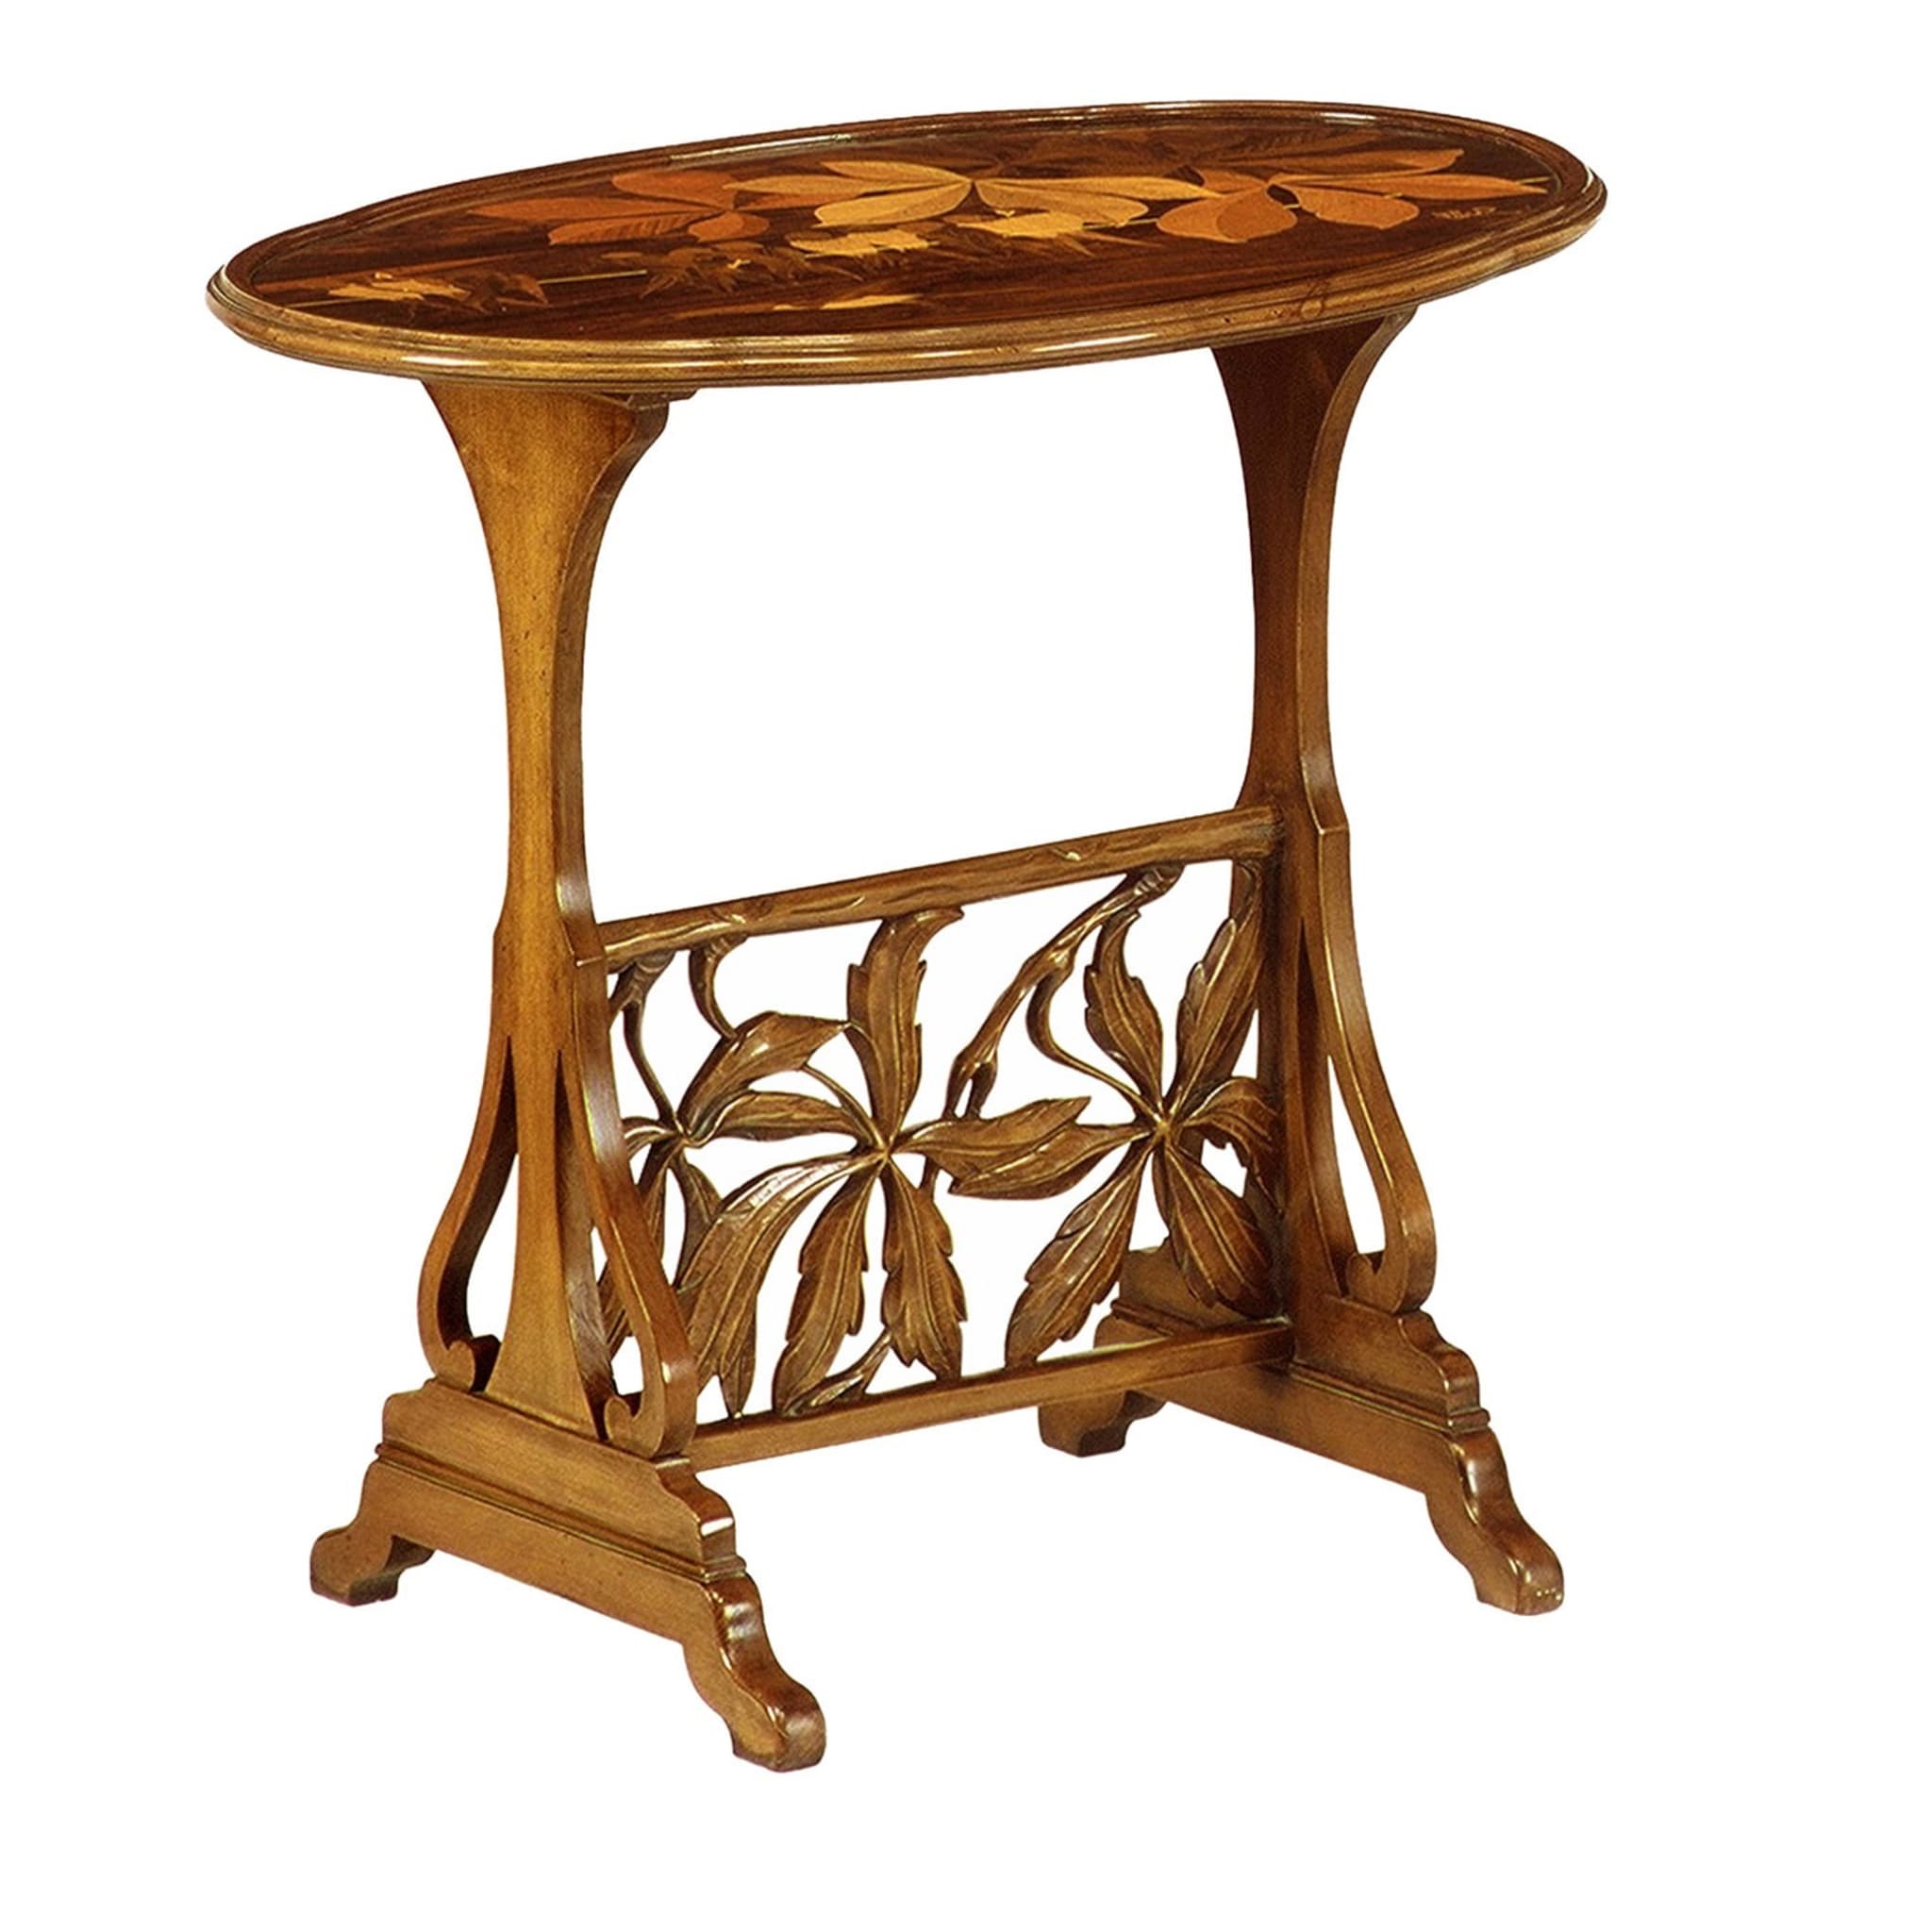 French Art Nouveau-Style Oval Inlaid Side Table by Emile Gallè - Main view